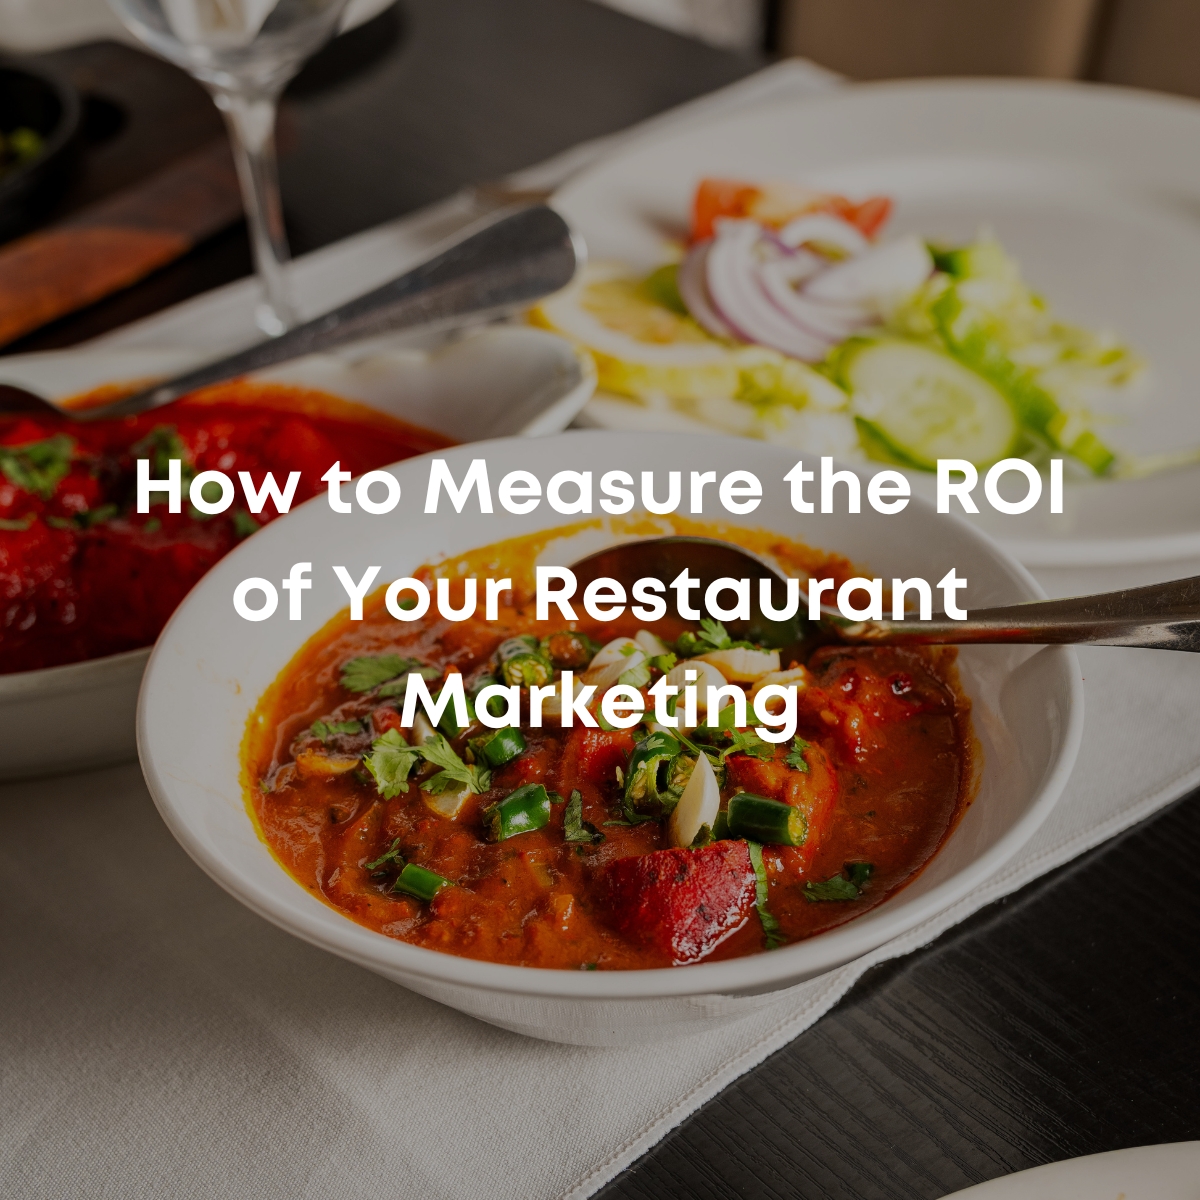 How to Measure the ROI of Your Restaurant Marketing